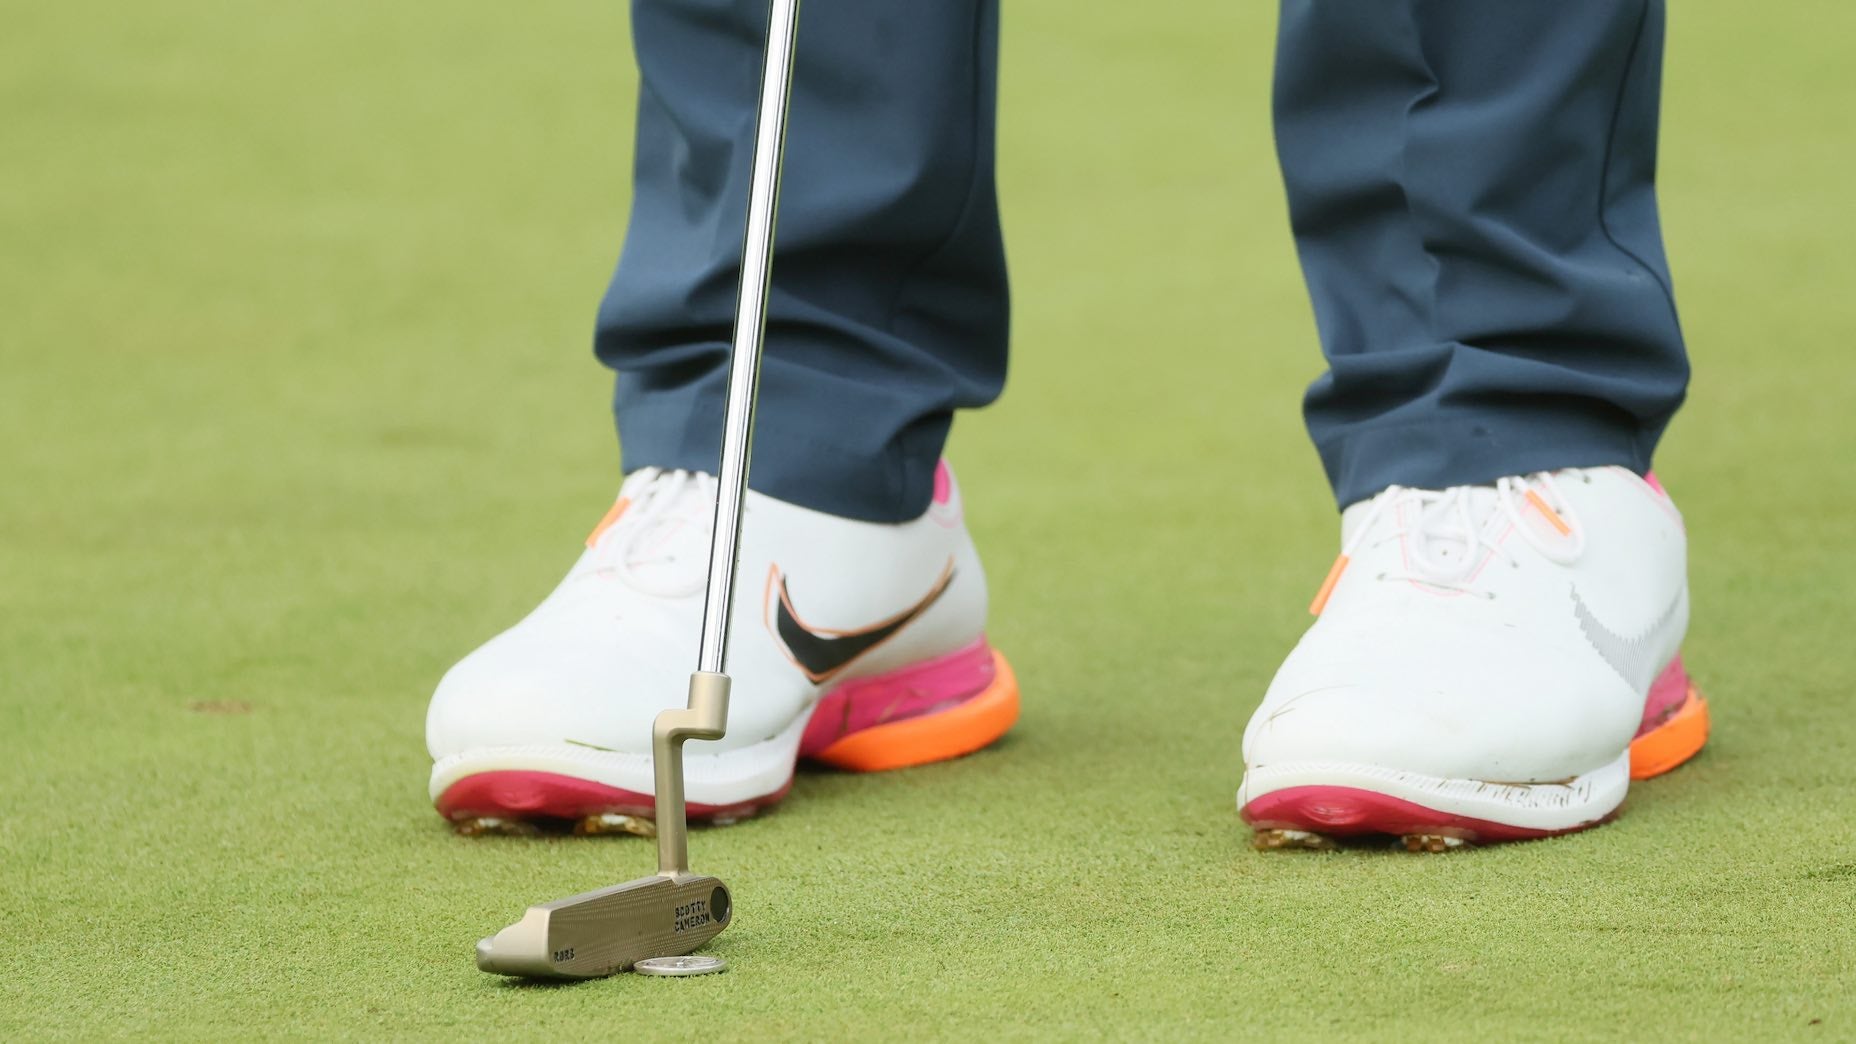 Rory McIlroy reunites with Scotty Cameron putter at the Olympics